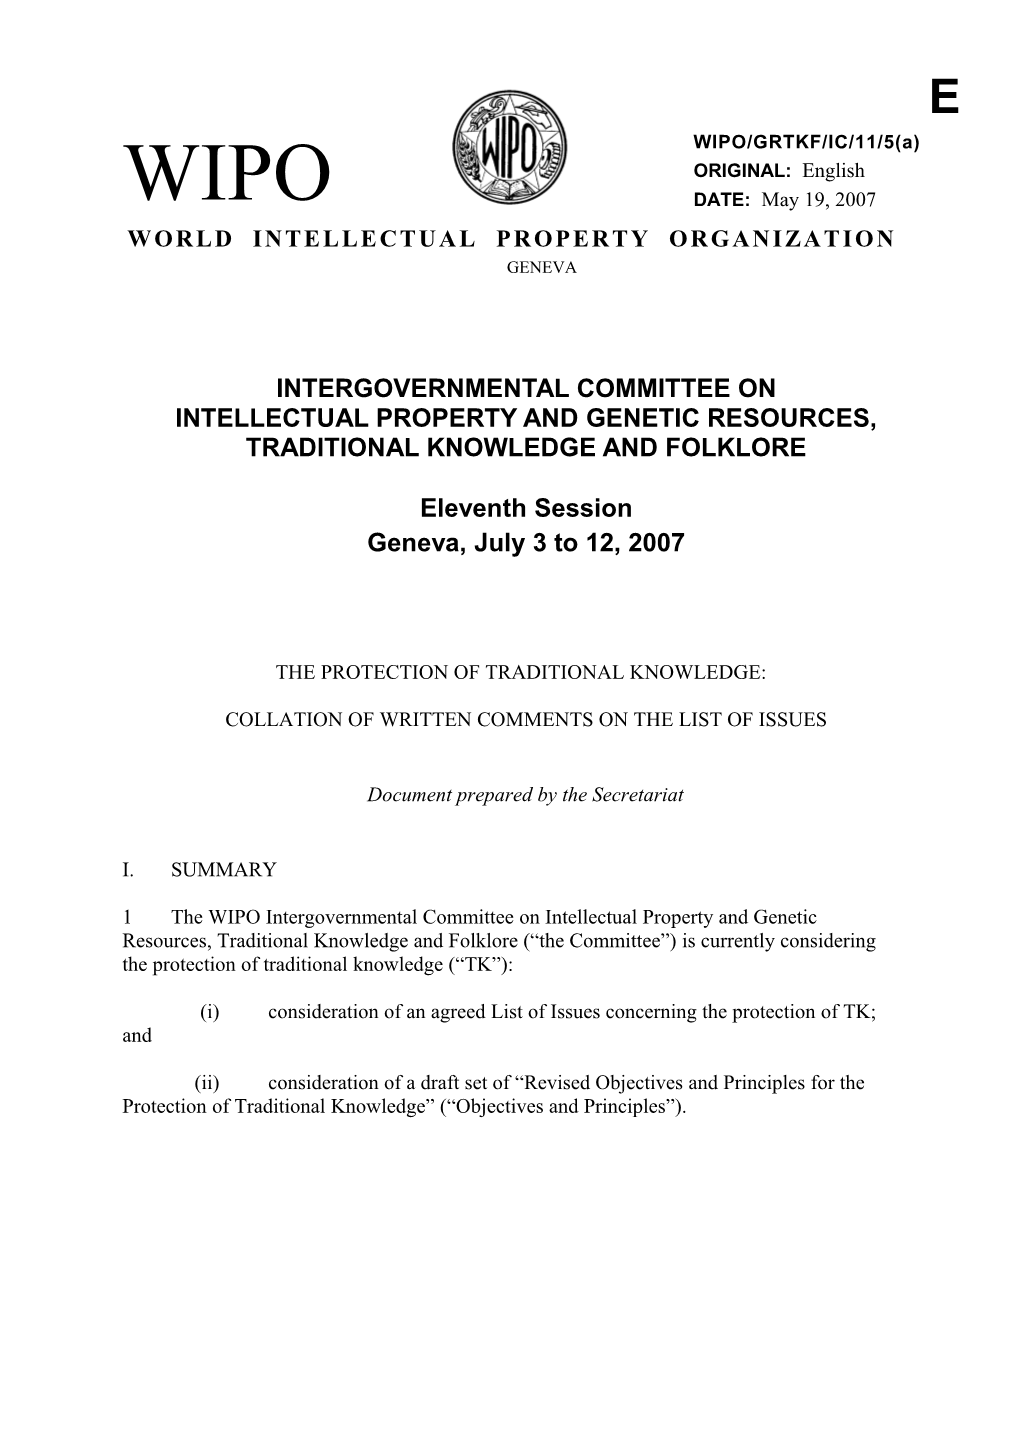 WIPO/GRTKF/IC/11/5(A): the Protection of Traditional Knowledge: Collation of Written Comments